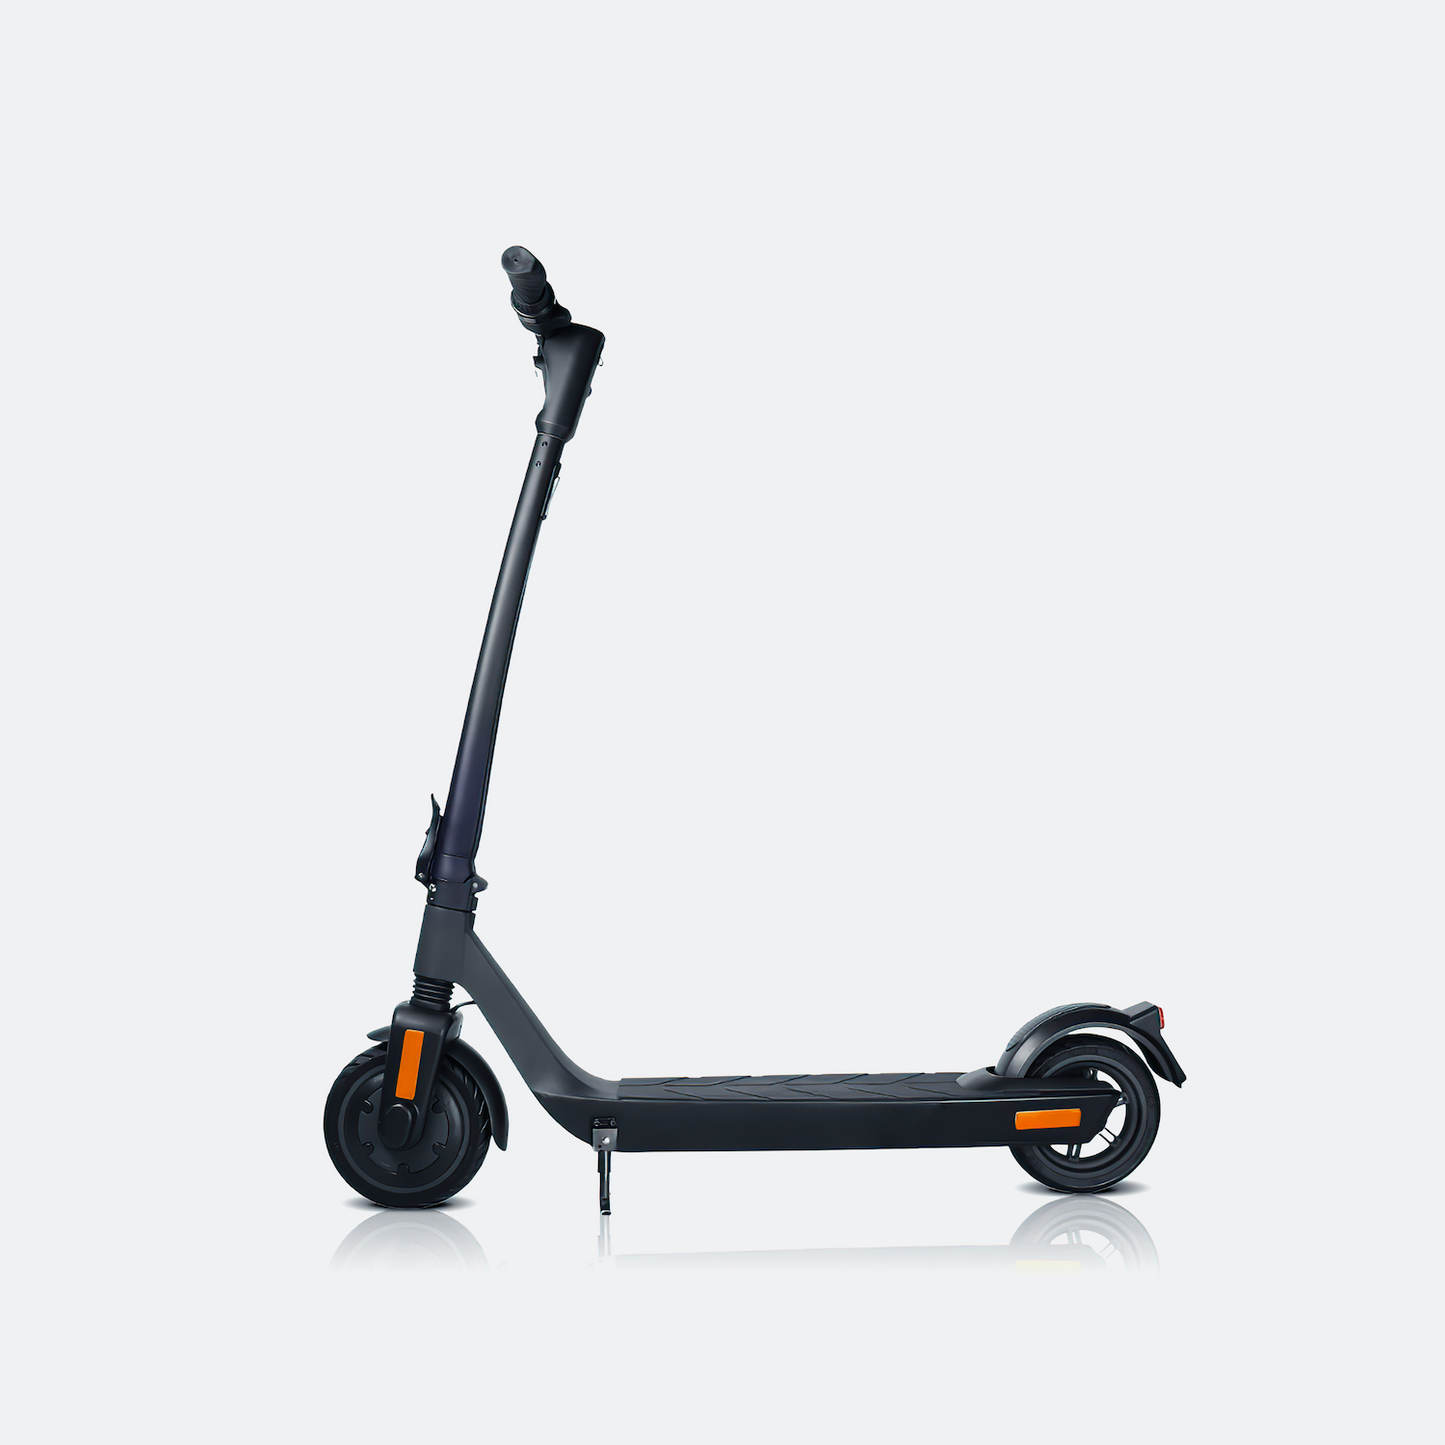 350w electric scooter with parking stand side view